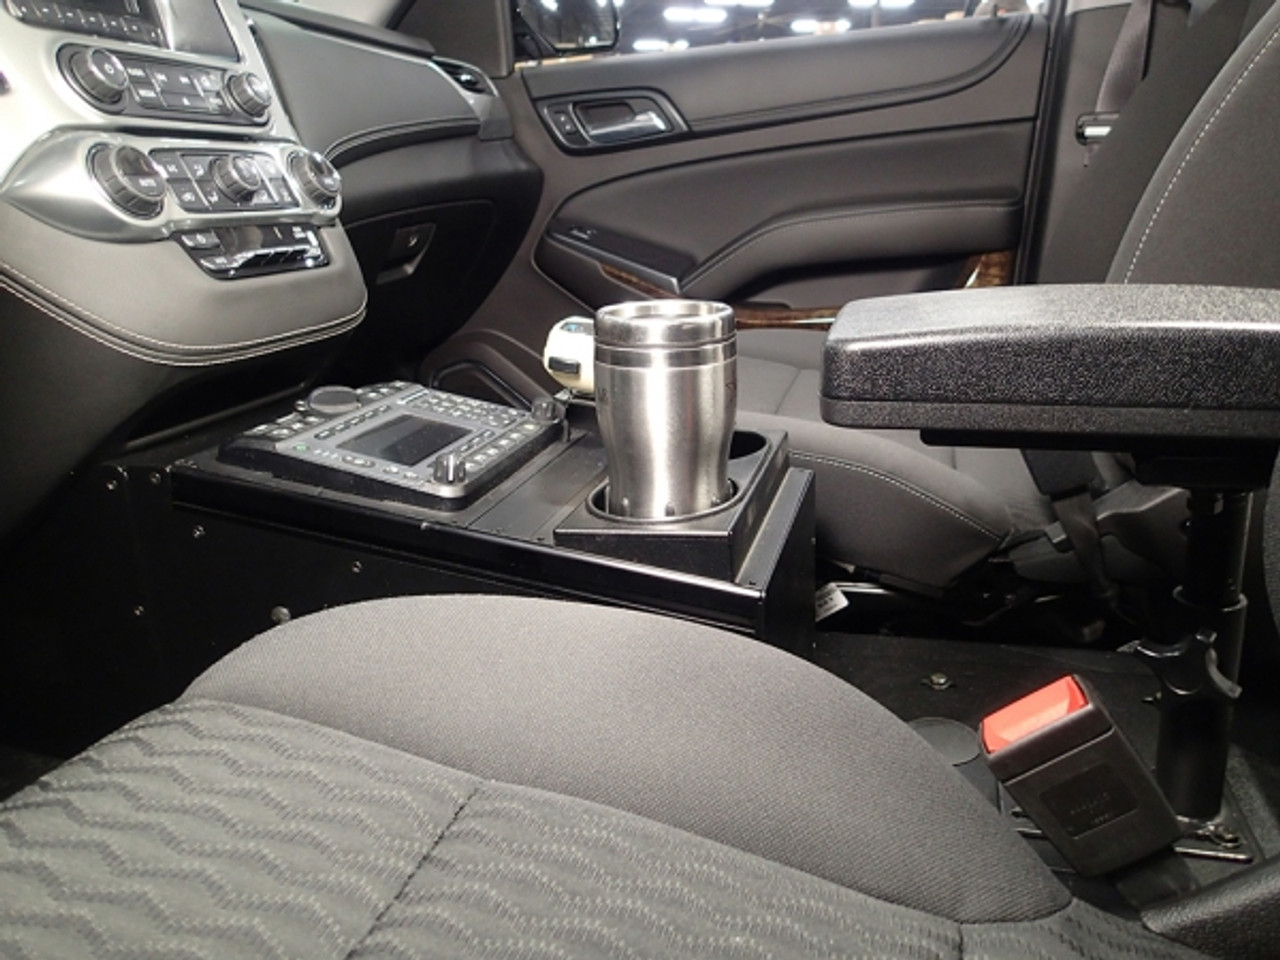 Havis OUT732-GH Dual Internal Angled Cup Holders